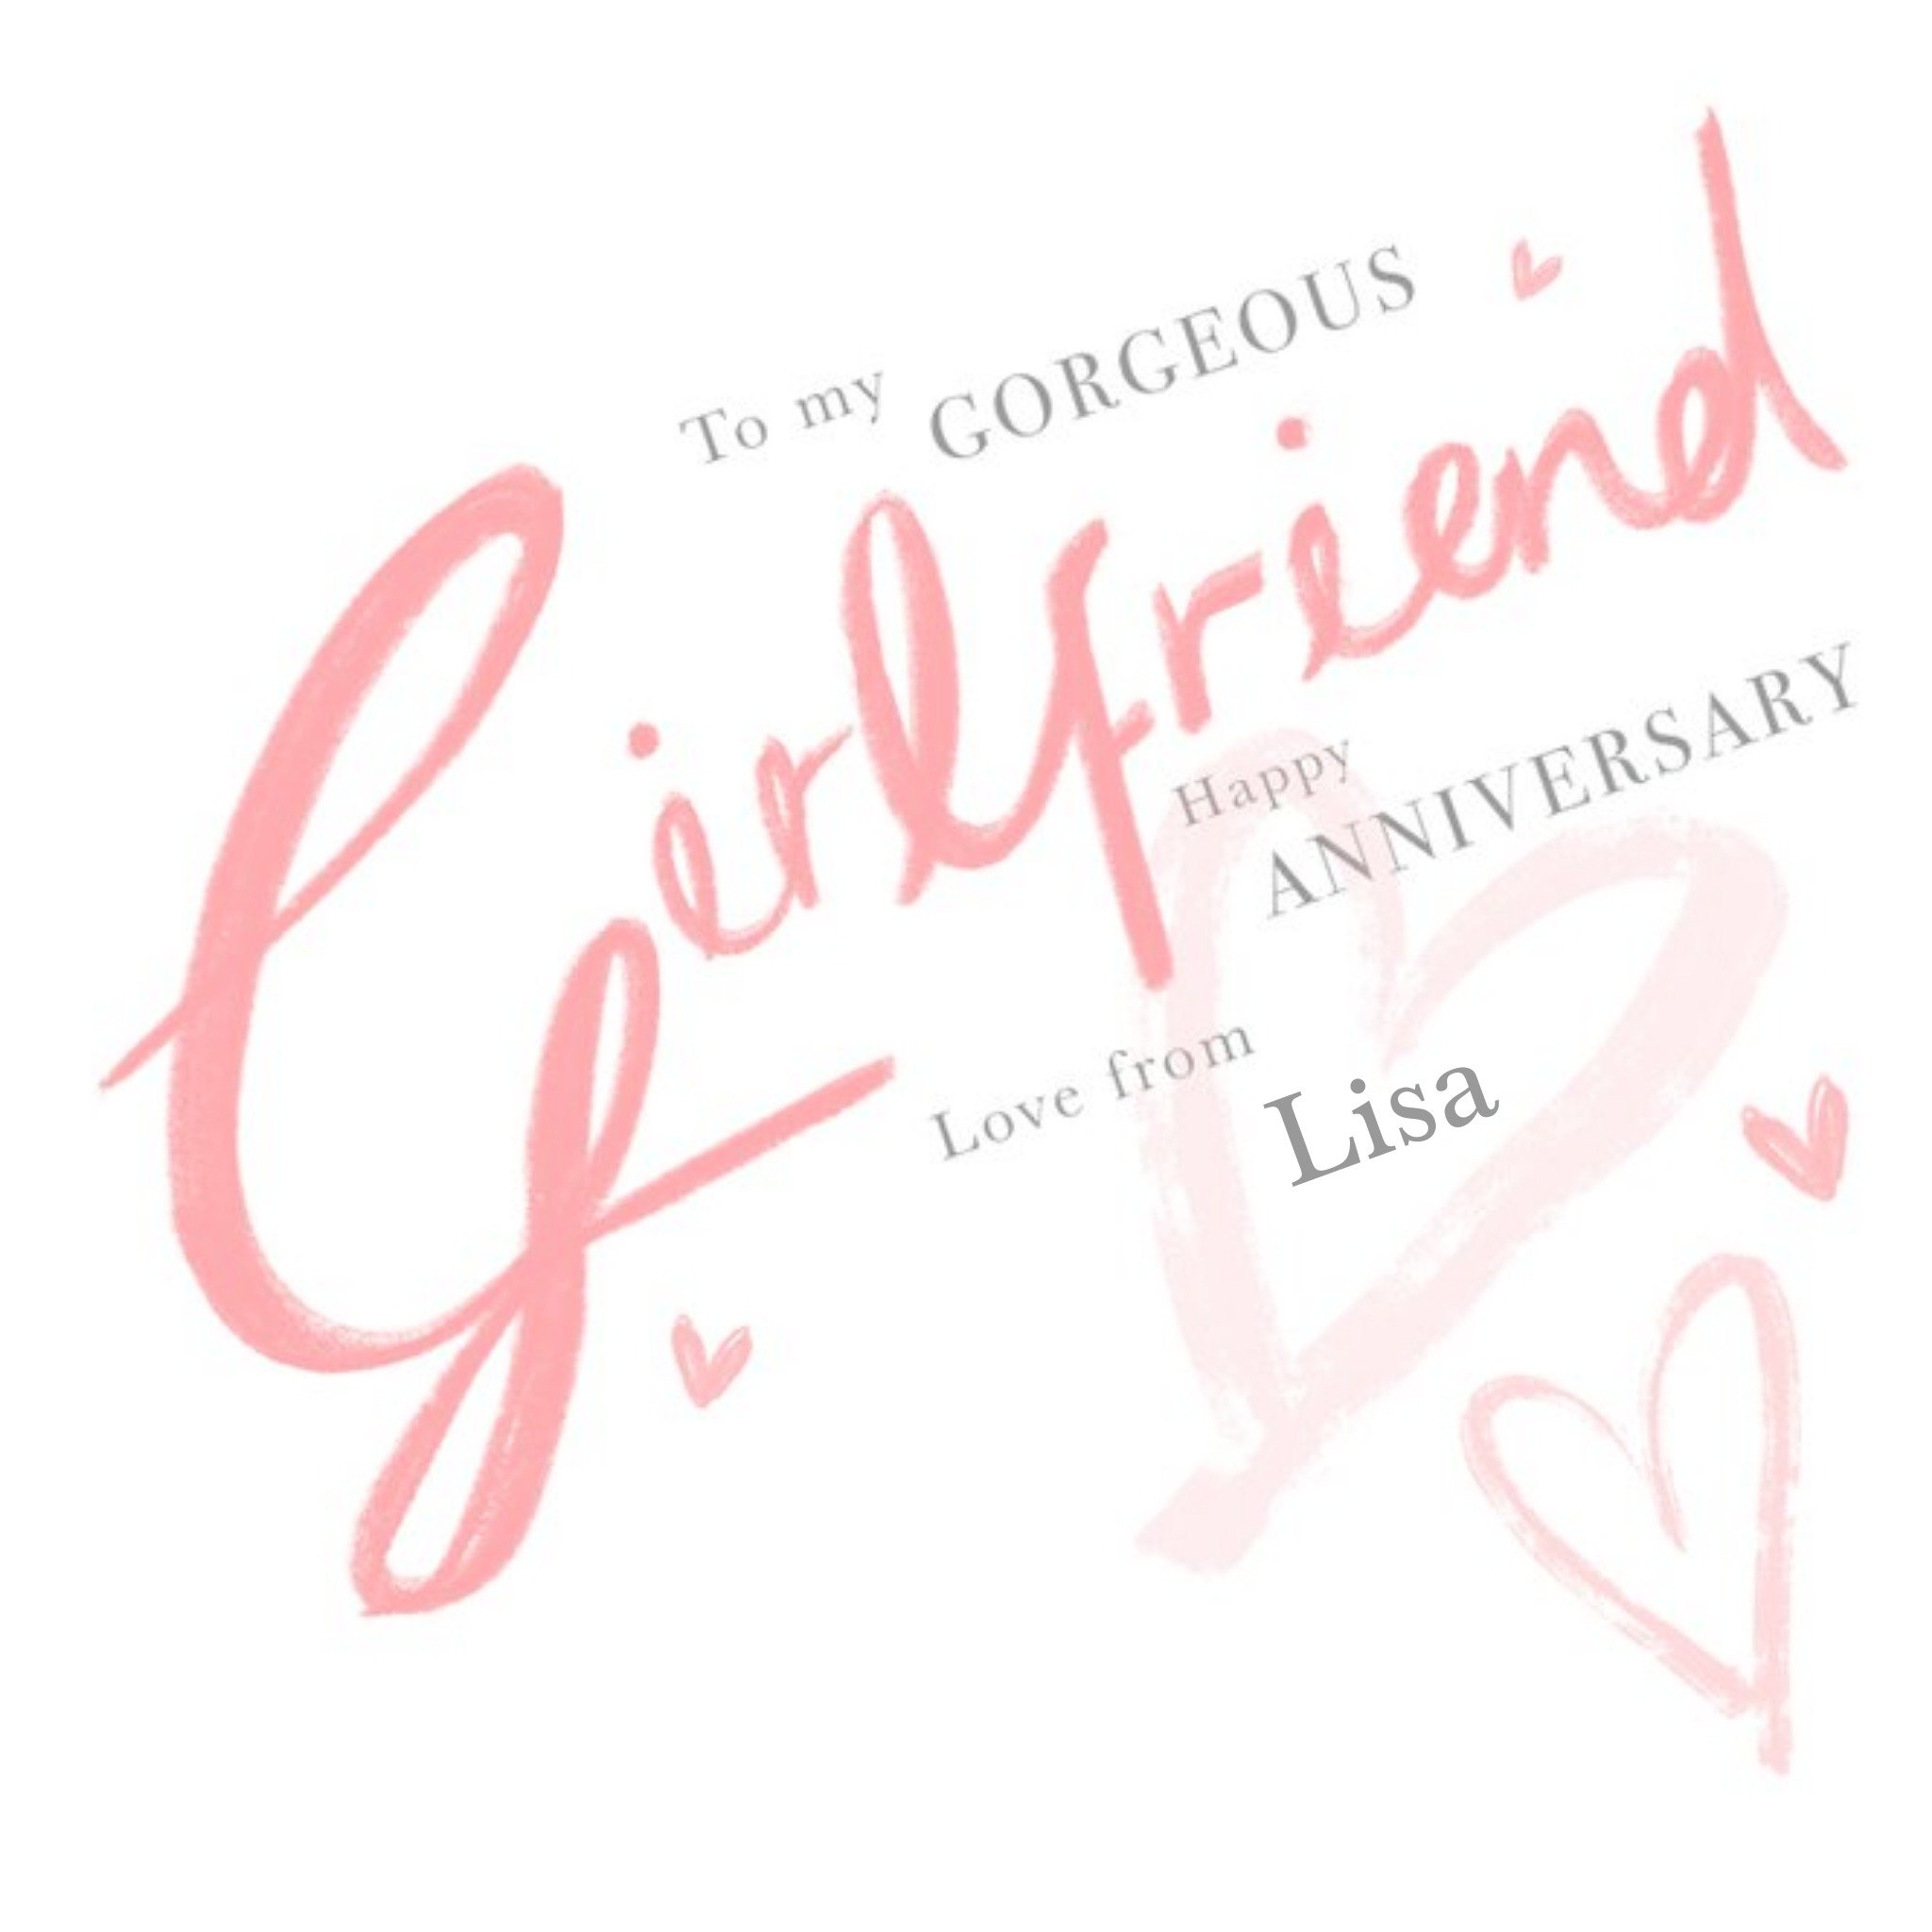 Love Hearts Millicent Venton Illustrated Pink Girlfriend Lettering Anniversary Card, Square